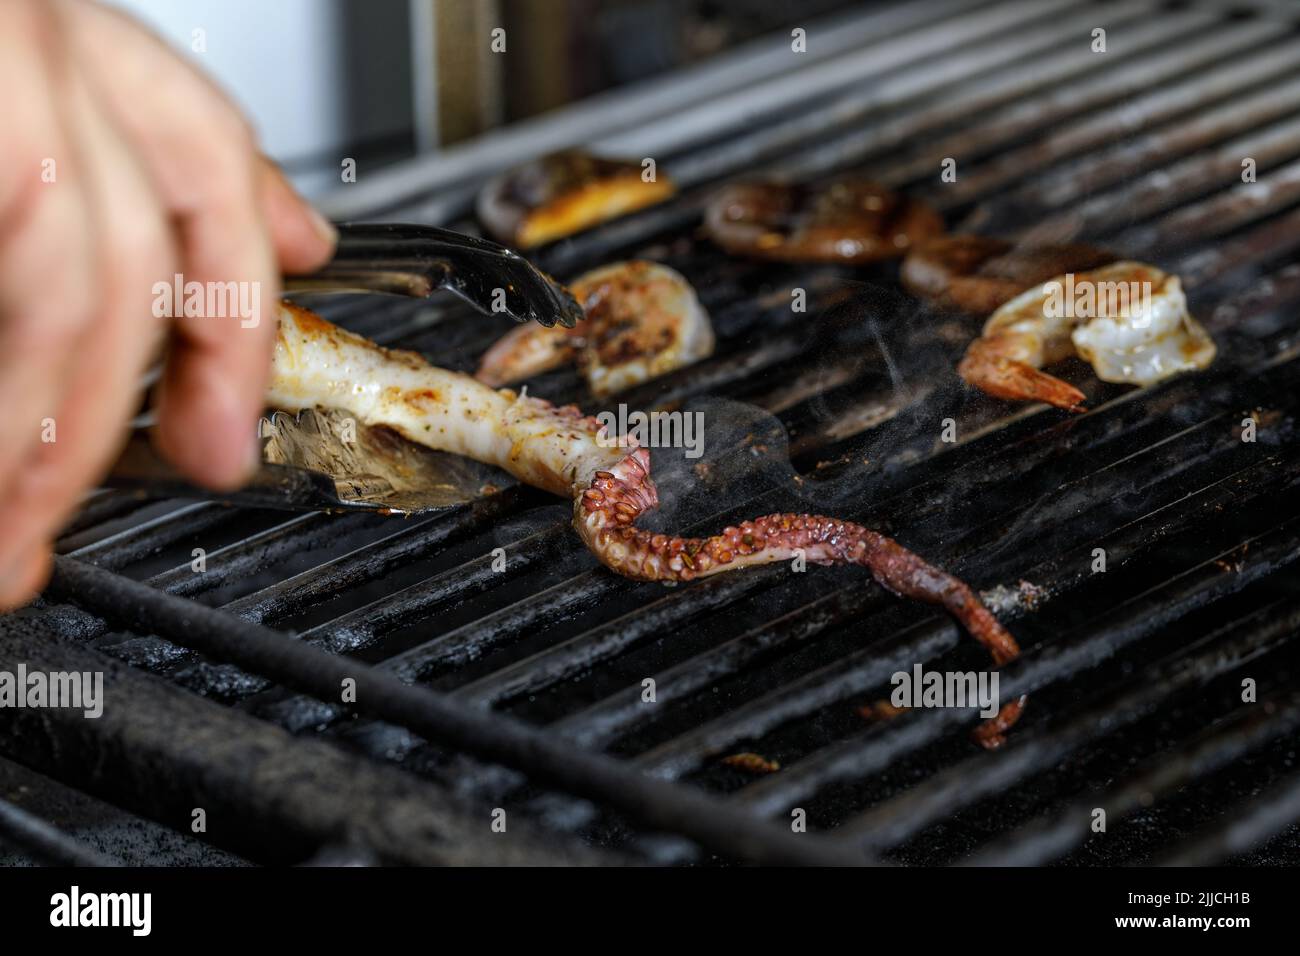 Process of grilling seafood on a barbecue grill over hot coal. Seafood recipes Stock Photo